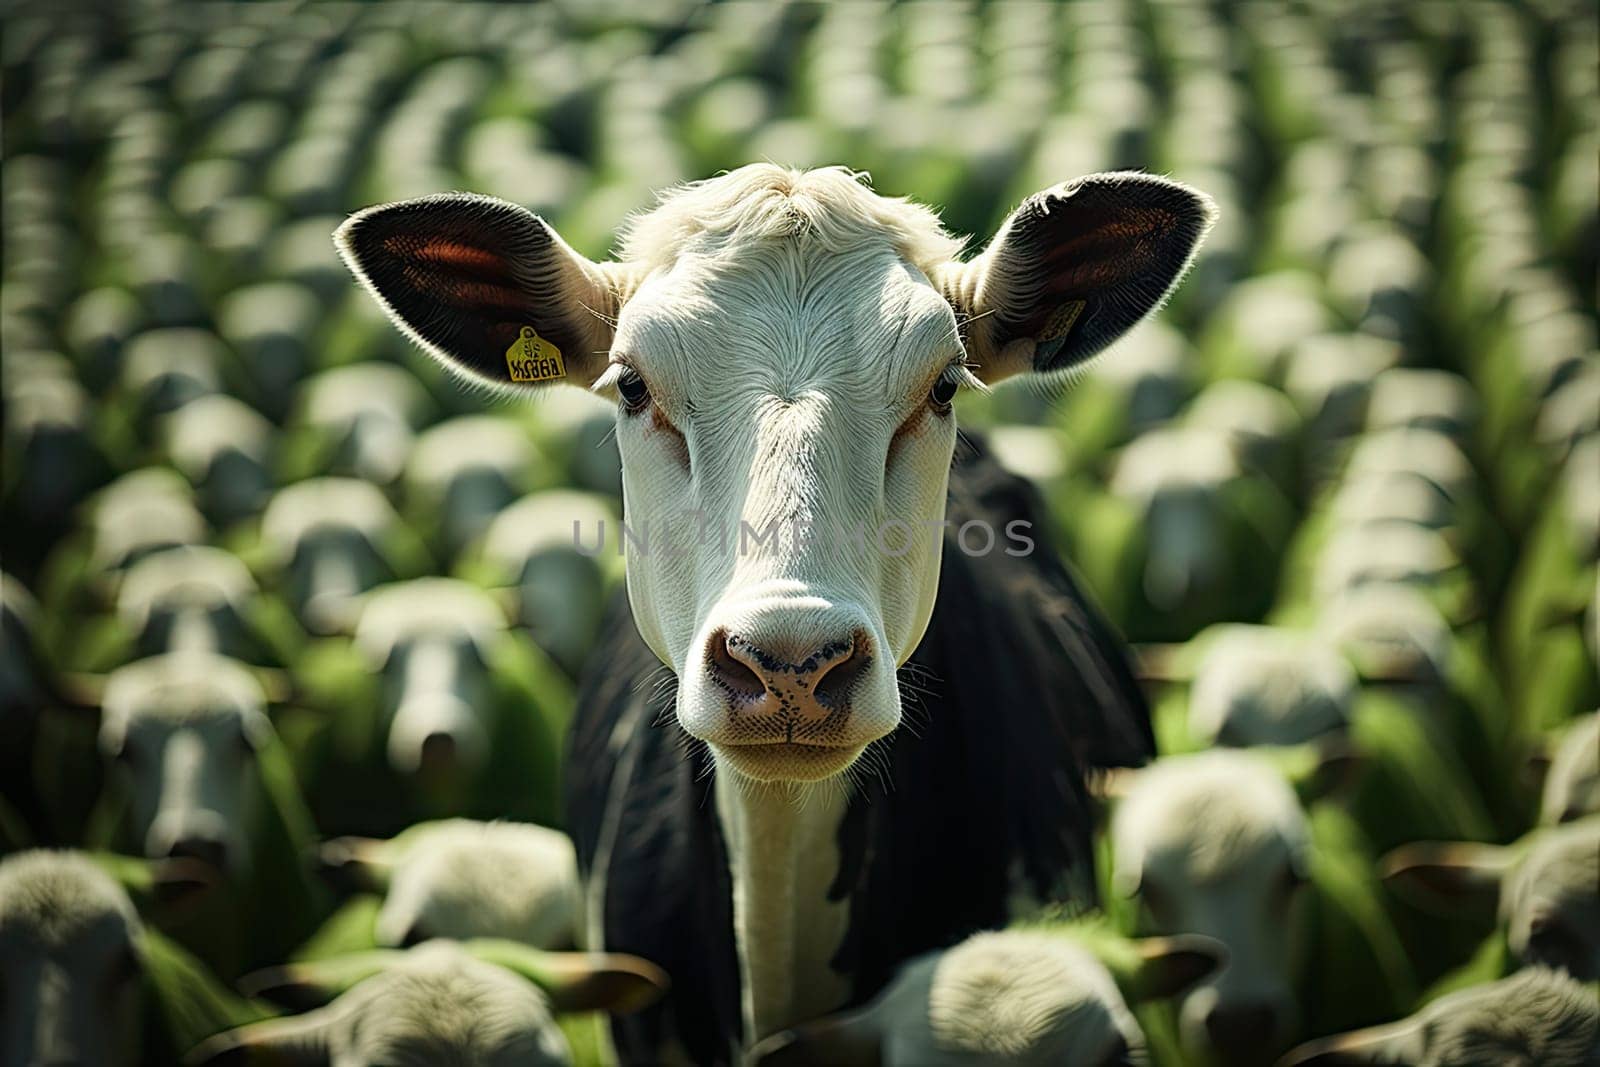 a black and white cow in the middle of a corn field looking at the camera with its head tilted towards the camera